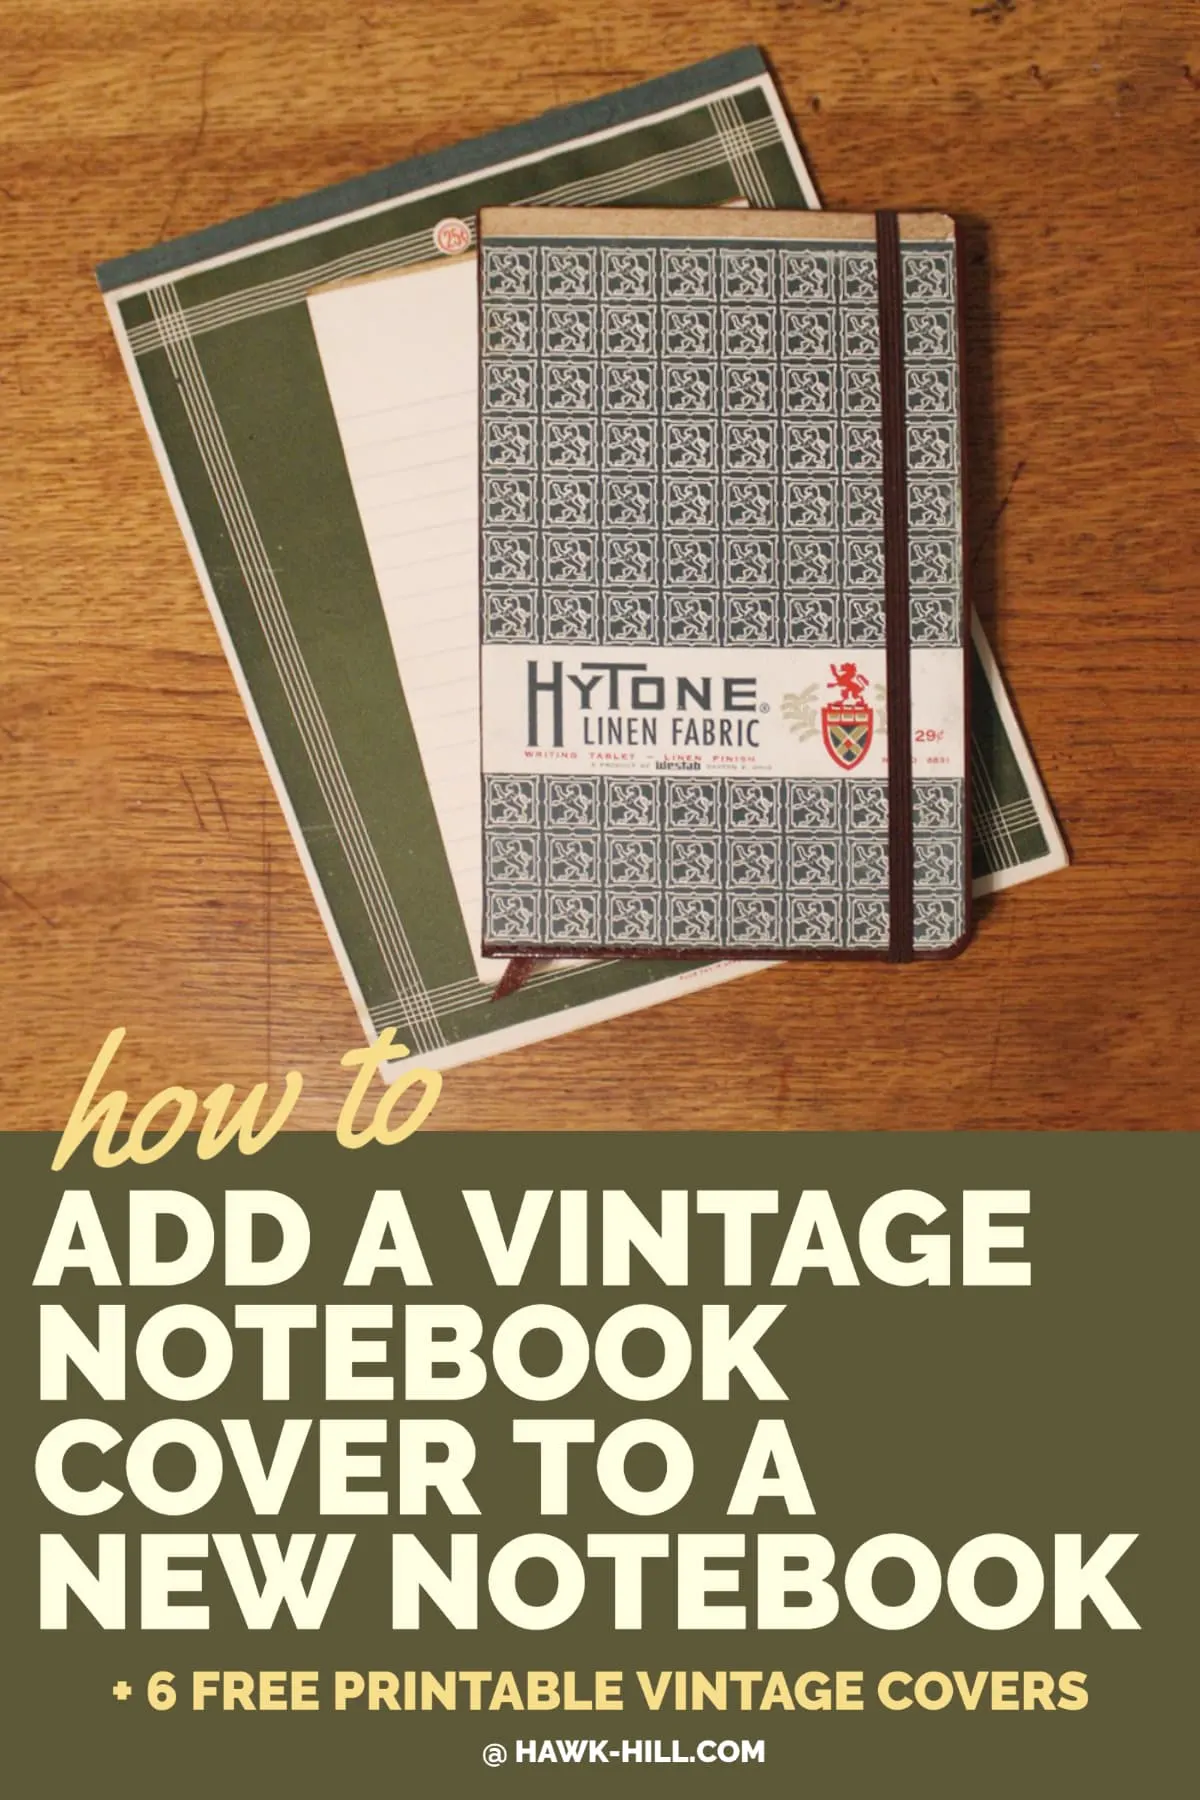 Adding a vintage cover to a new notebook is a quick DIY upgrade